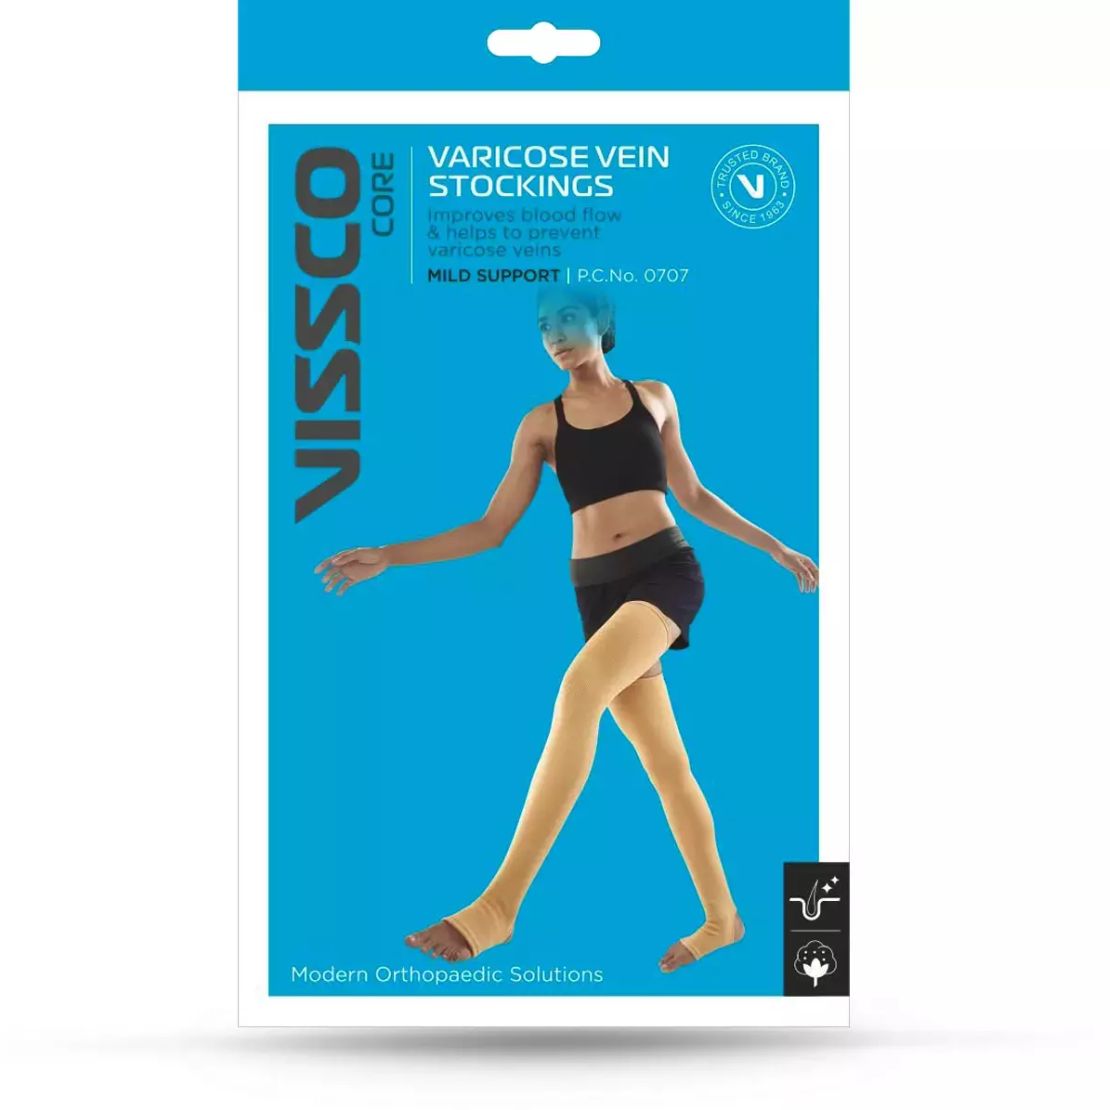 Vissco Varicose Vein Stockings Provides Leg Compression to Improve Blood Circulation & Relieves Pain.